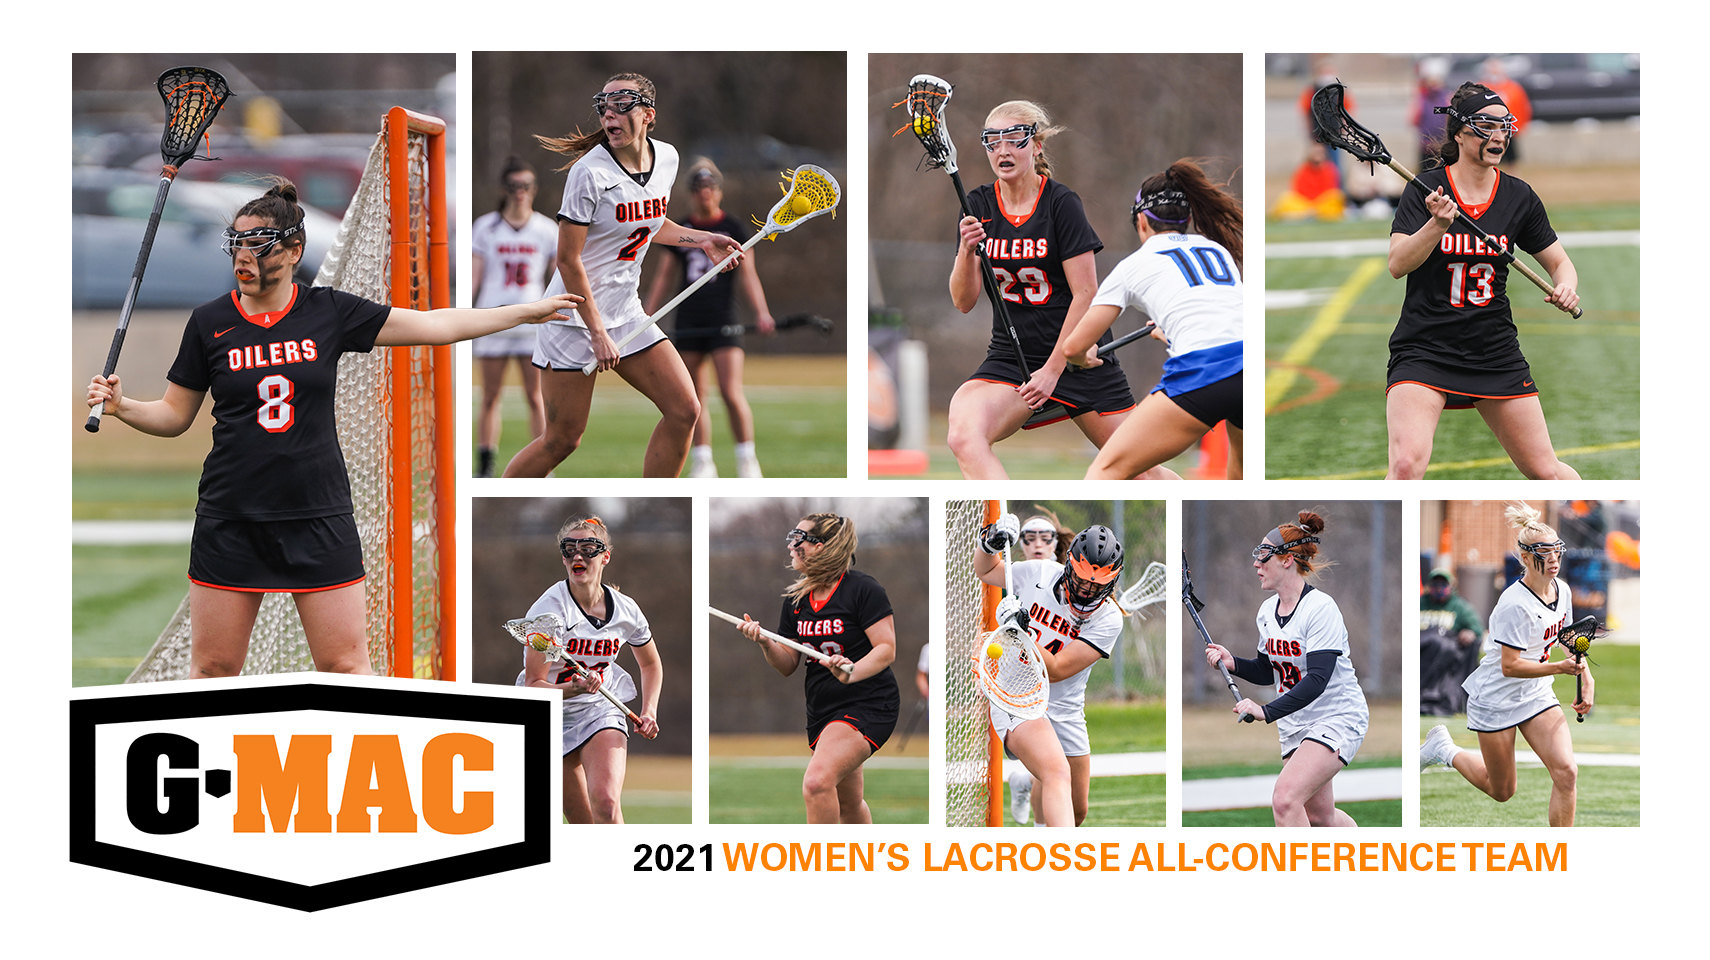 Women's lacrosse all-conference team